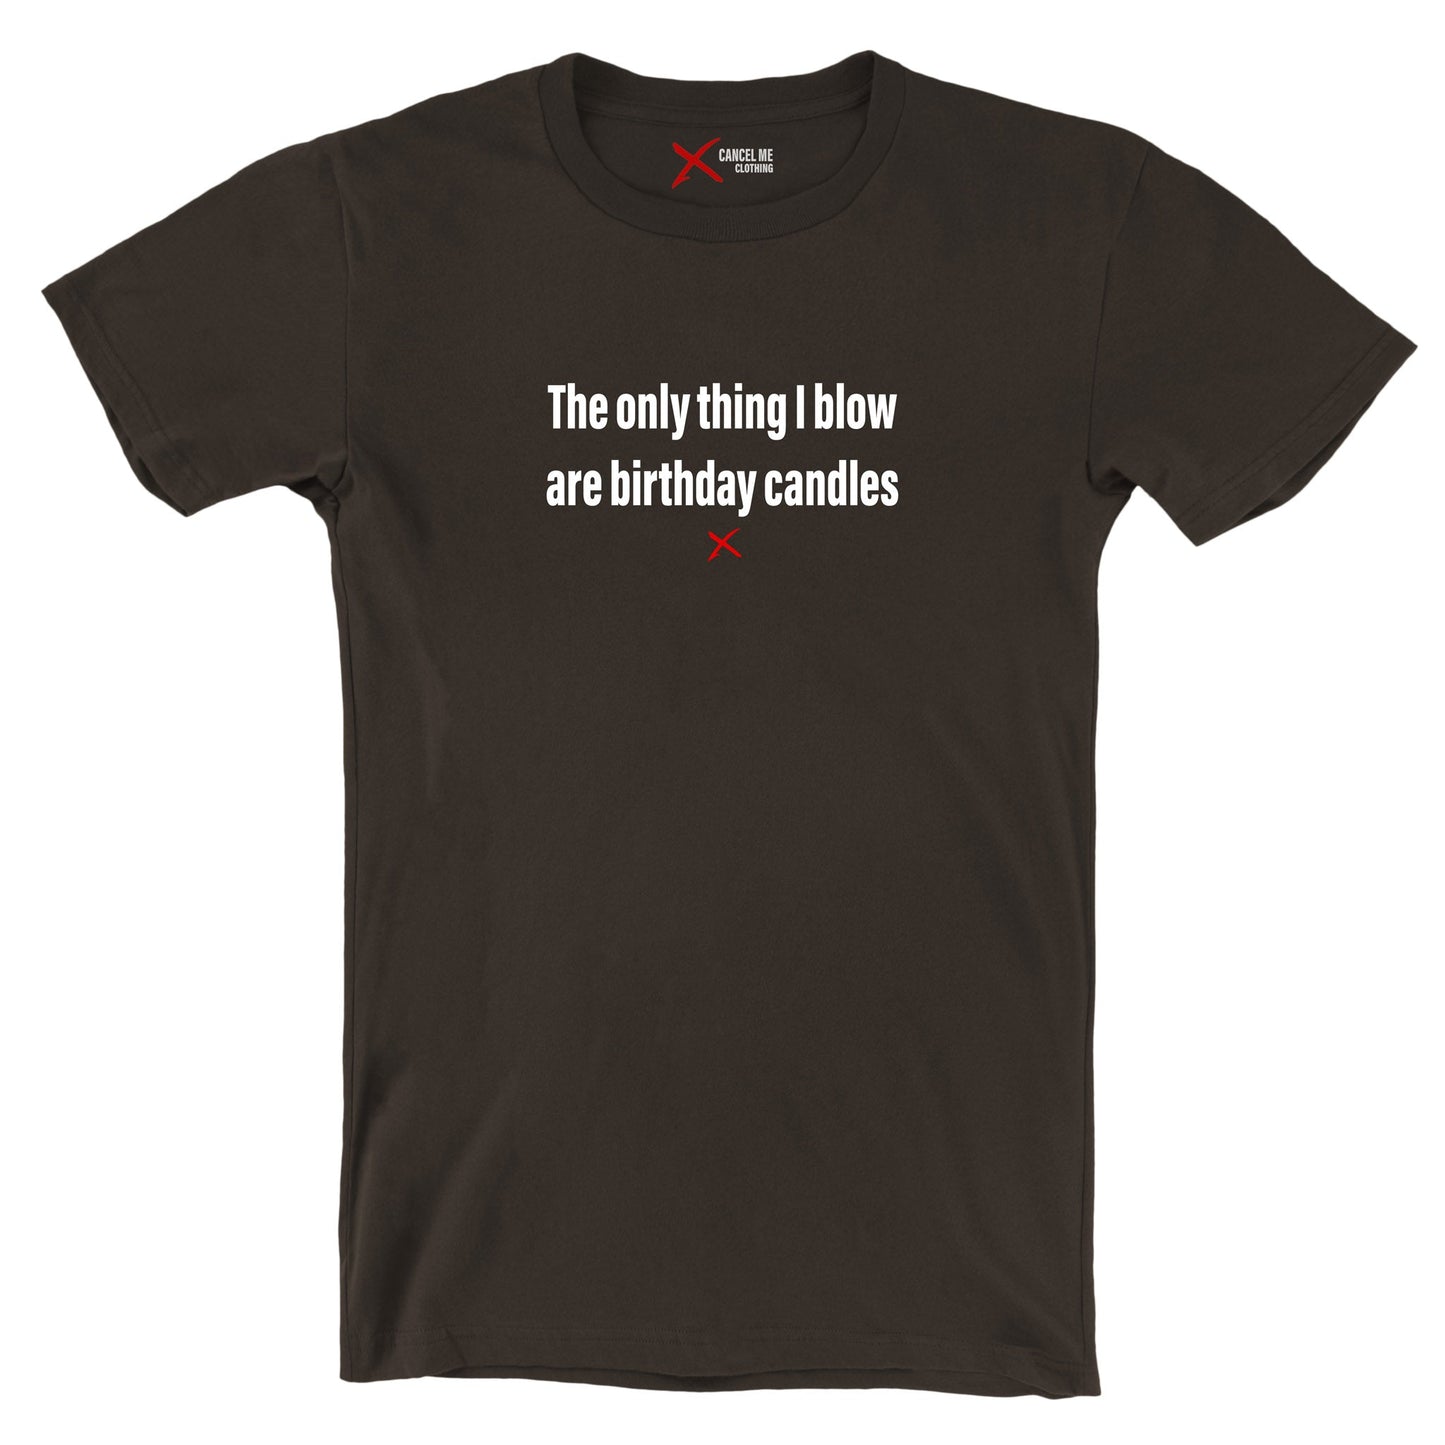 The only thing I blow are birthday candles - Shirt